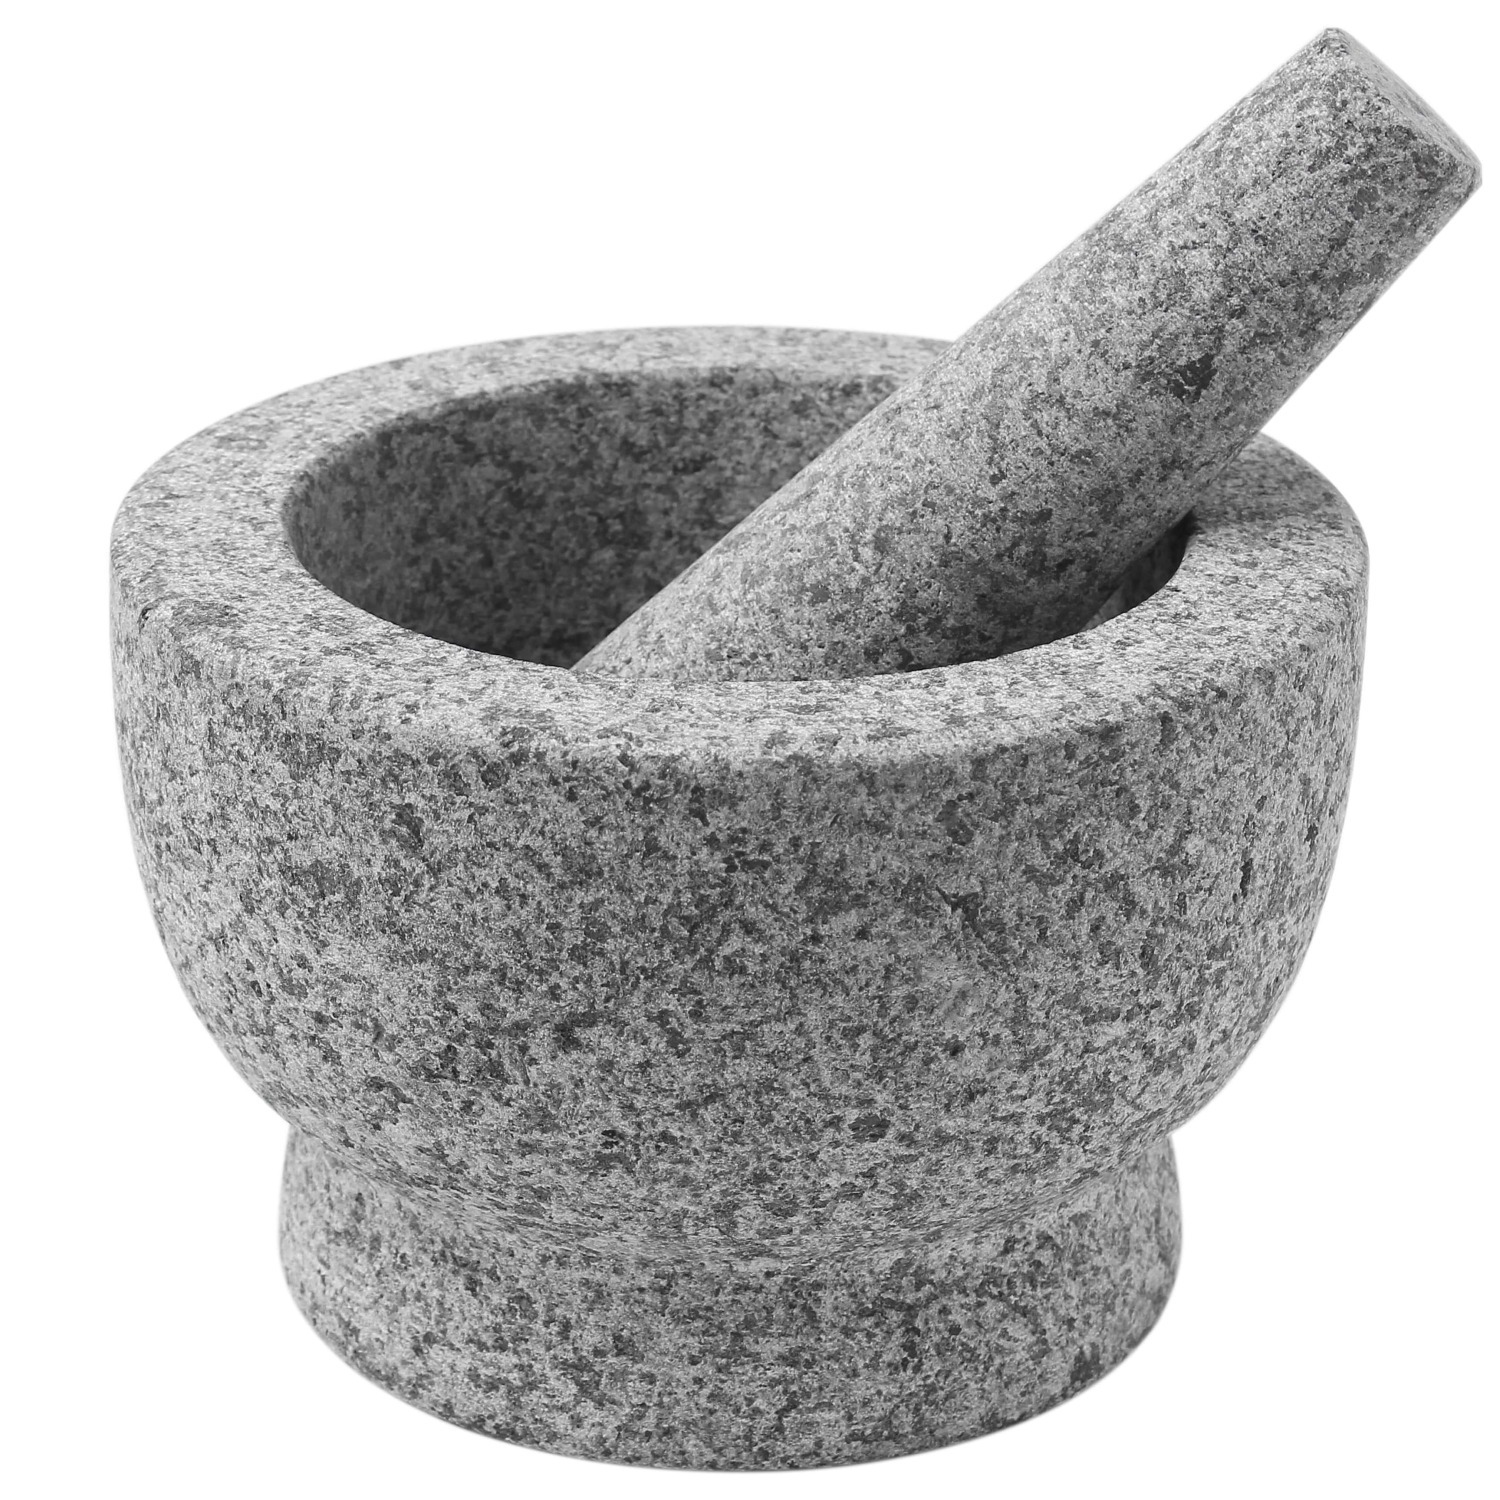 ChefSofi Granite Mortar and Pestle Set w/ 2-Cup Capacity $17.83 + Free Shipping